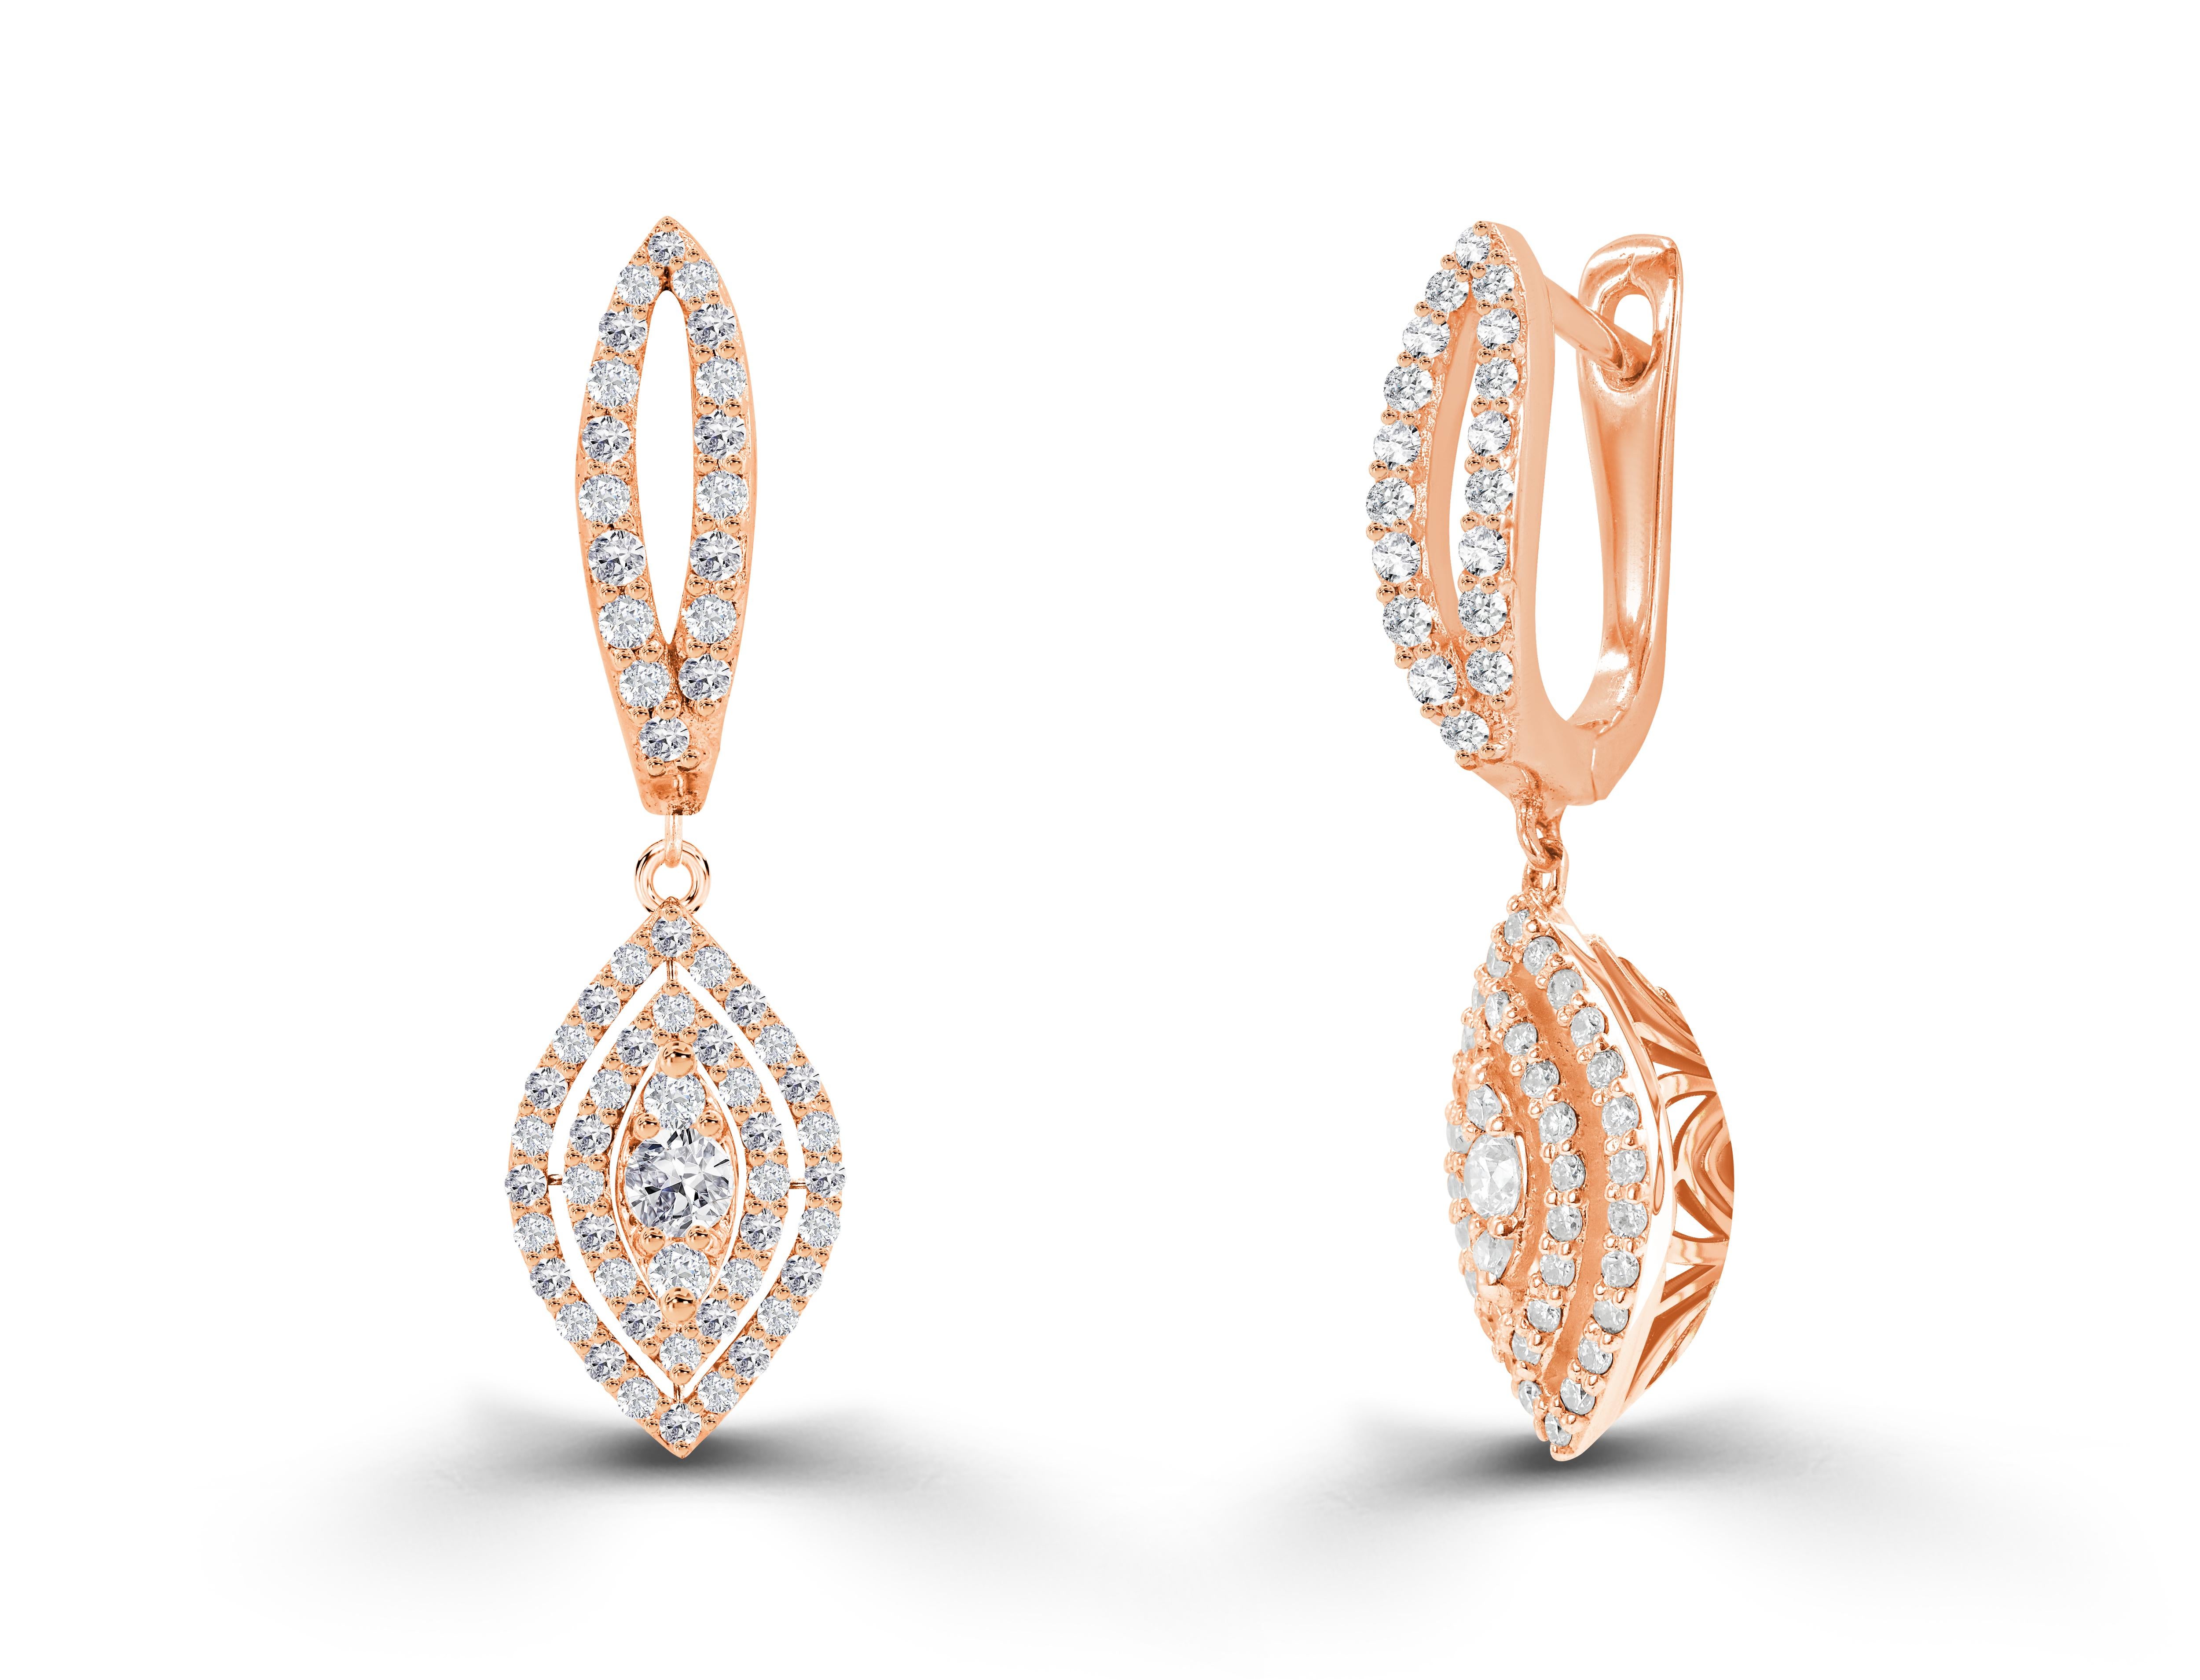 0.70 Ct Diamond Marquise shaped Drop Earrings in 18K Gold, Round Brilliant cut diamond earrings, Natural Diamond Earrings, Cluster dangle earrings, Heavy End Earrings.

Jewels By Tarry presents to you a beautiful Earring collection with natural